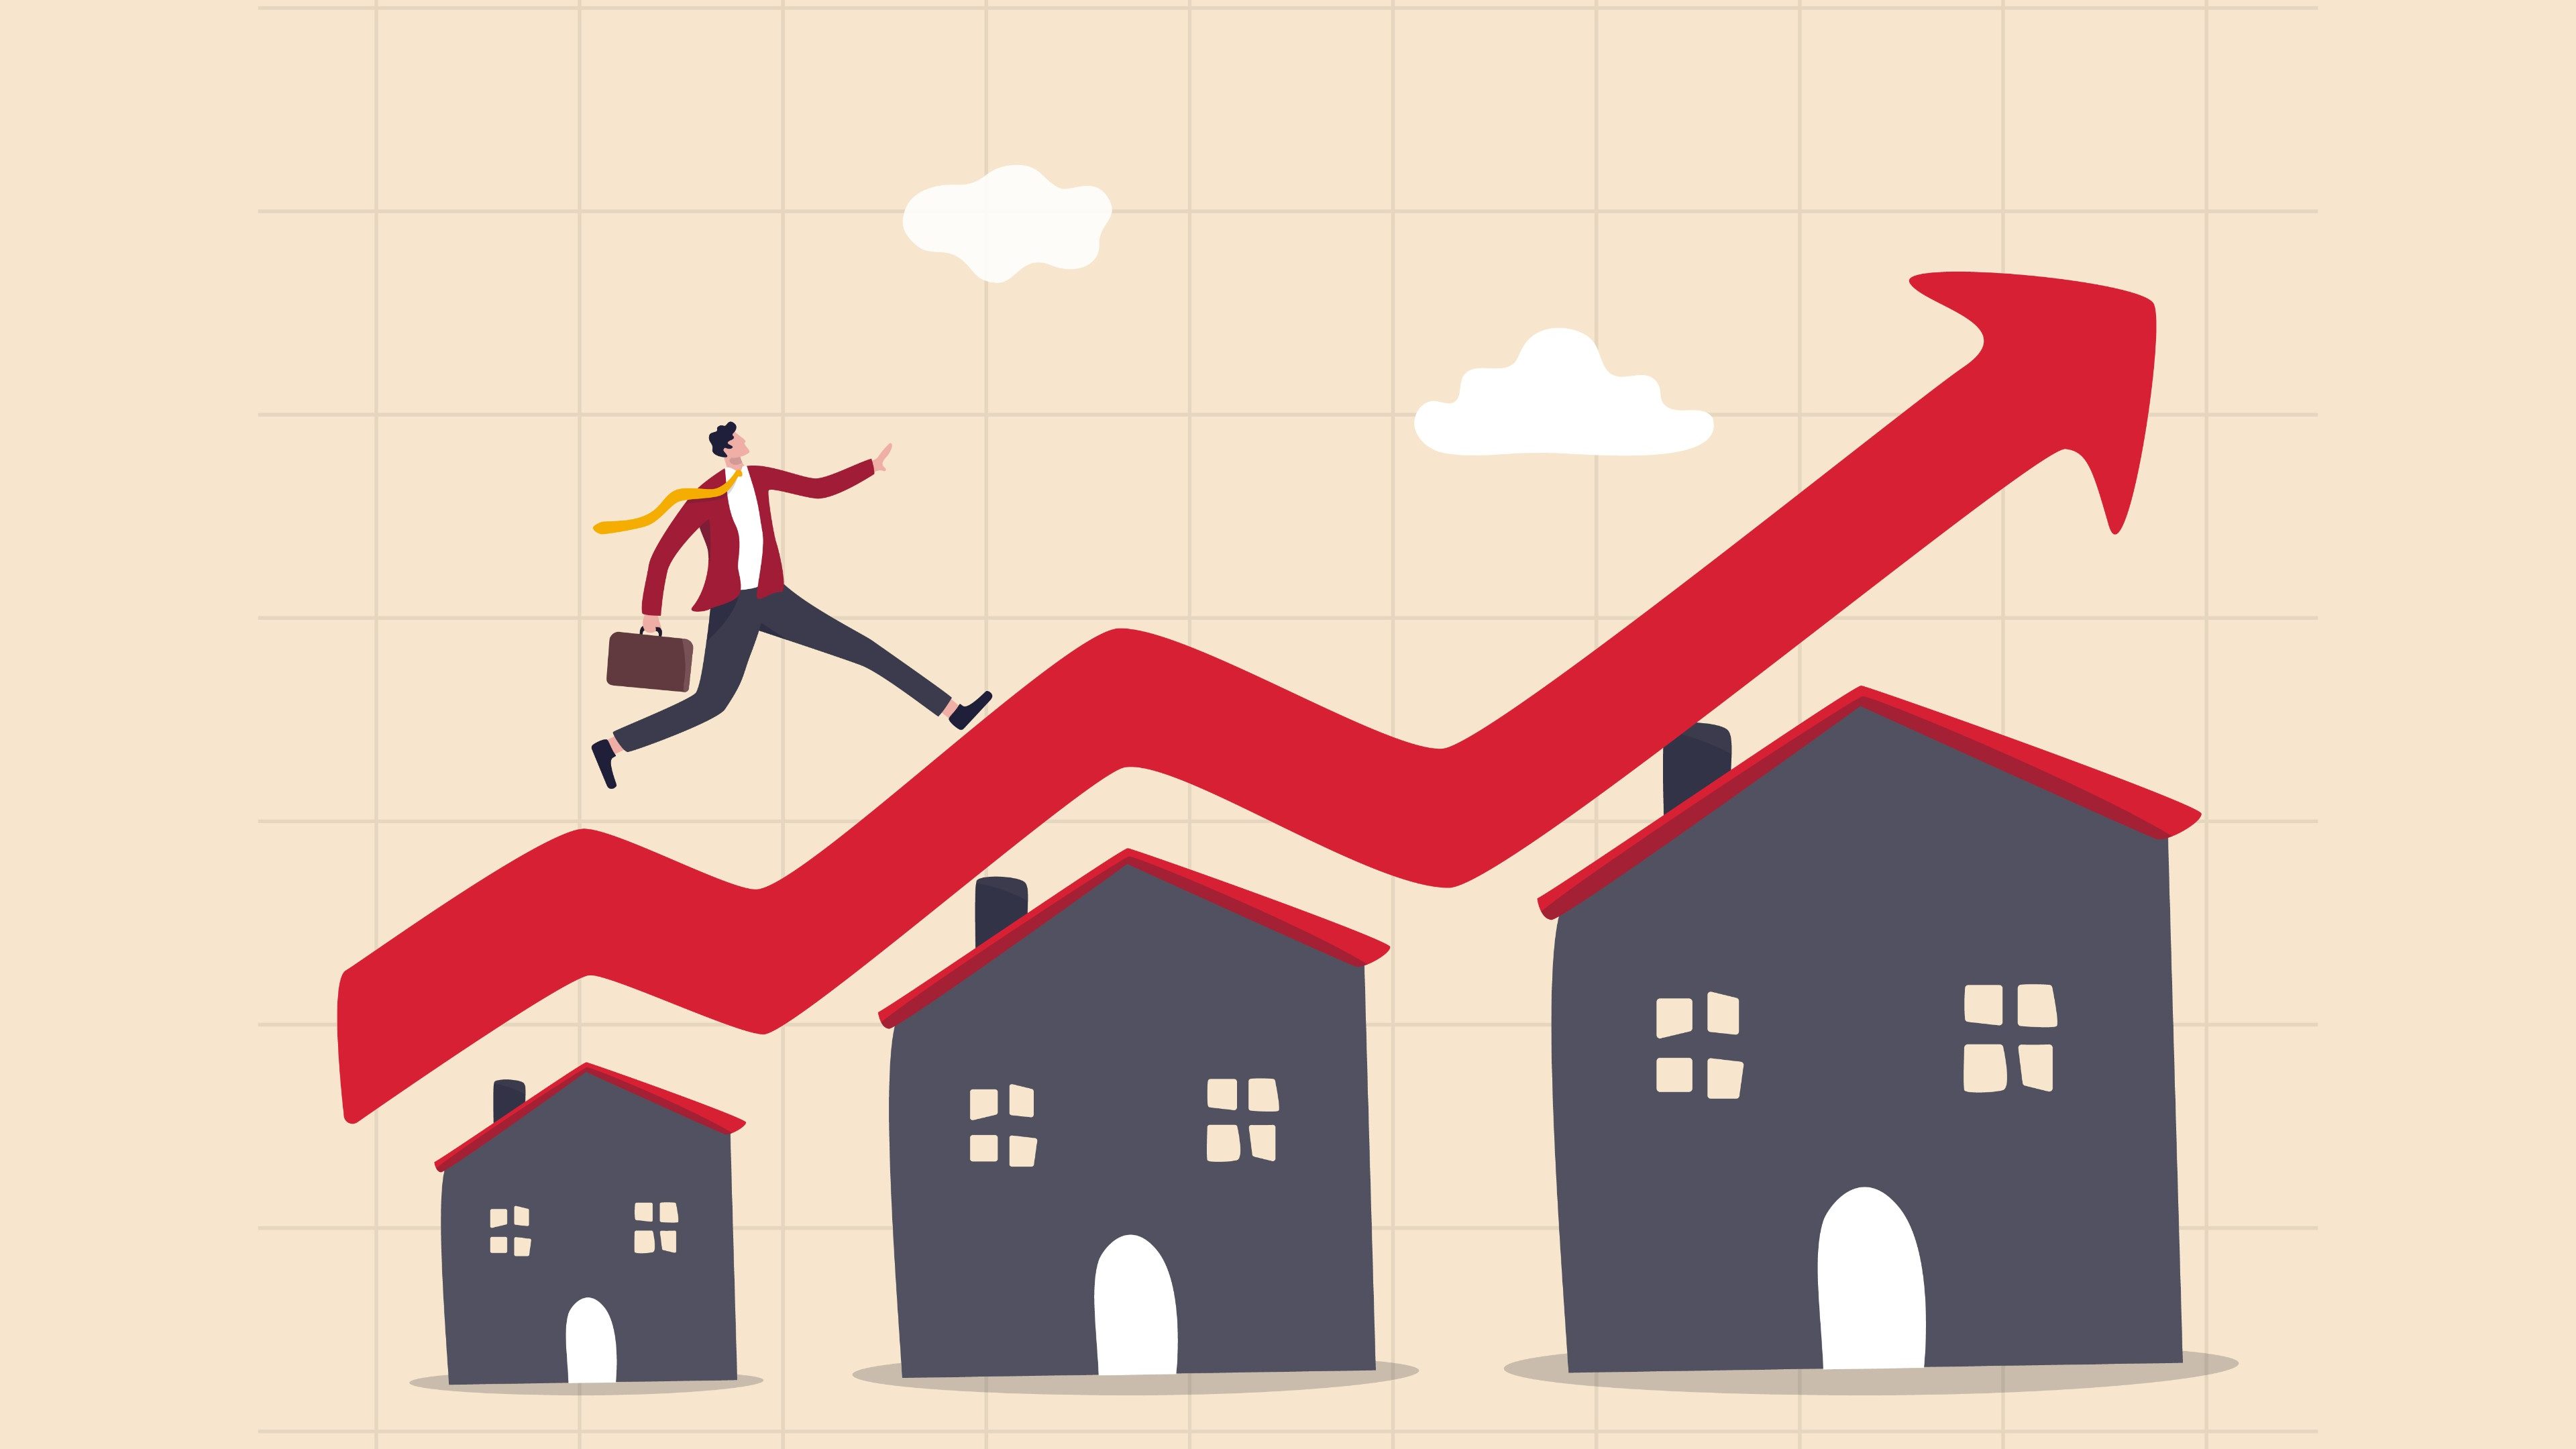 Housing price rising up, real estate or property growth concept, businessman running on rising green graph on house roof.